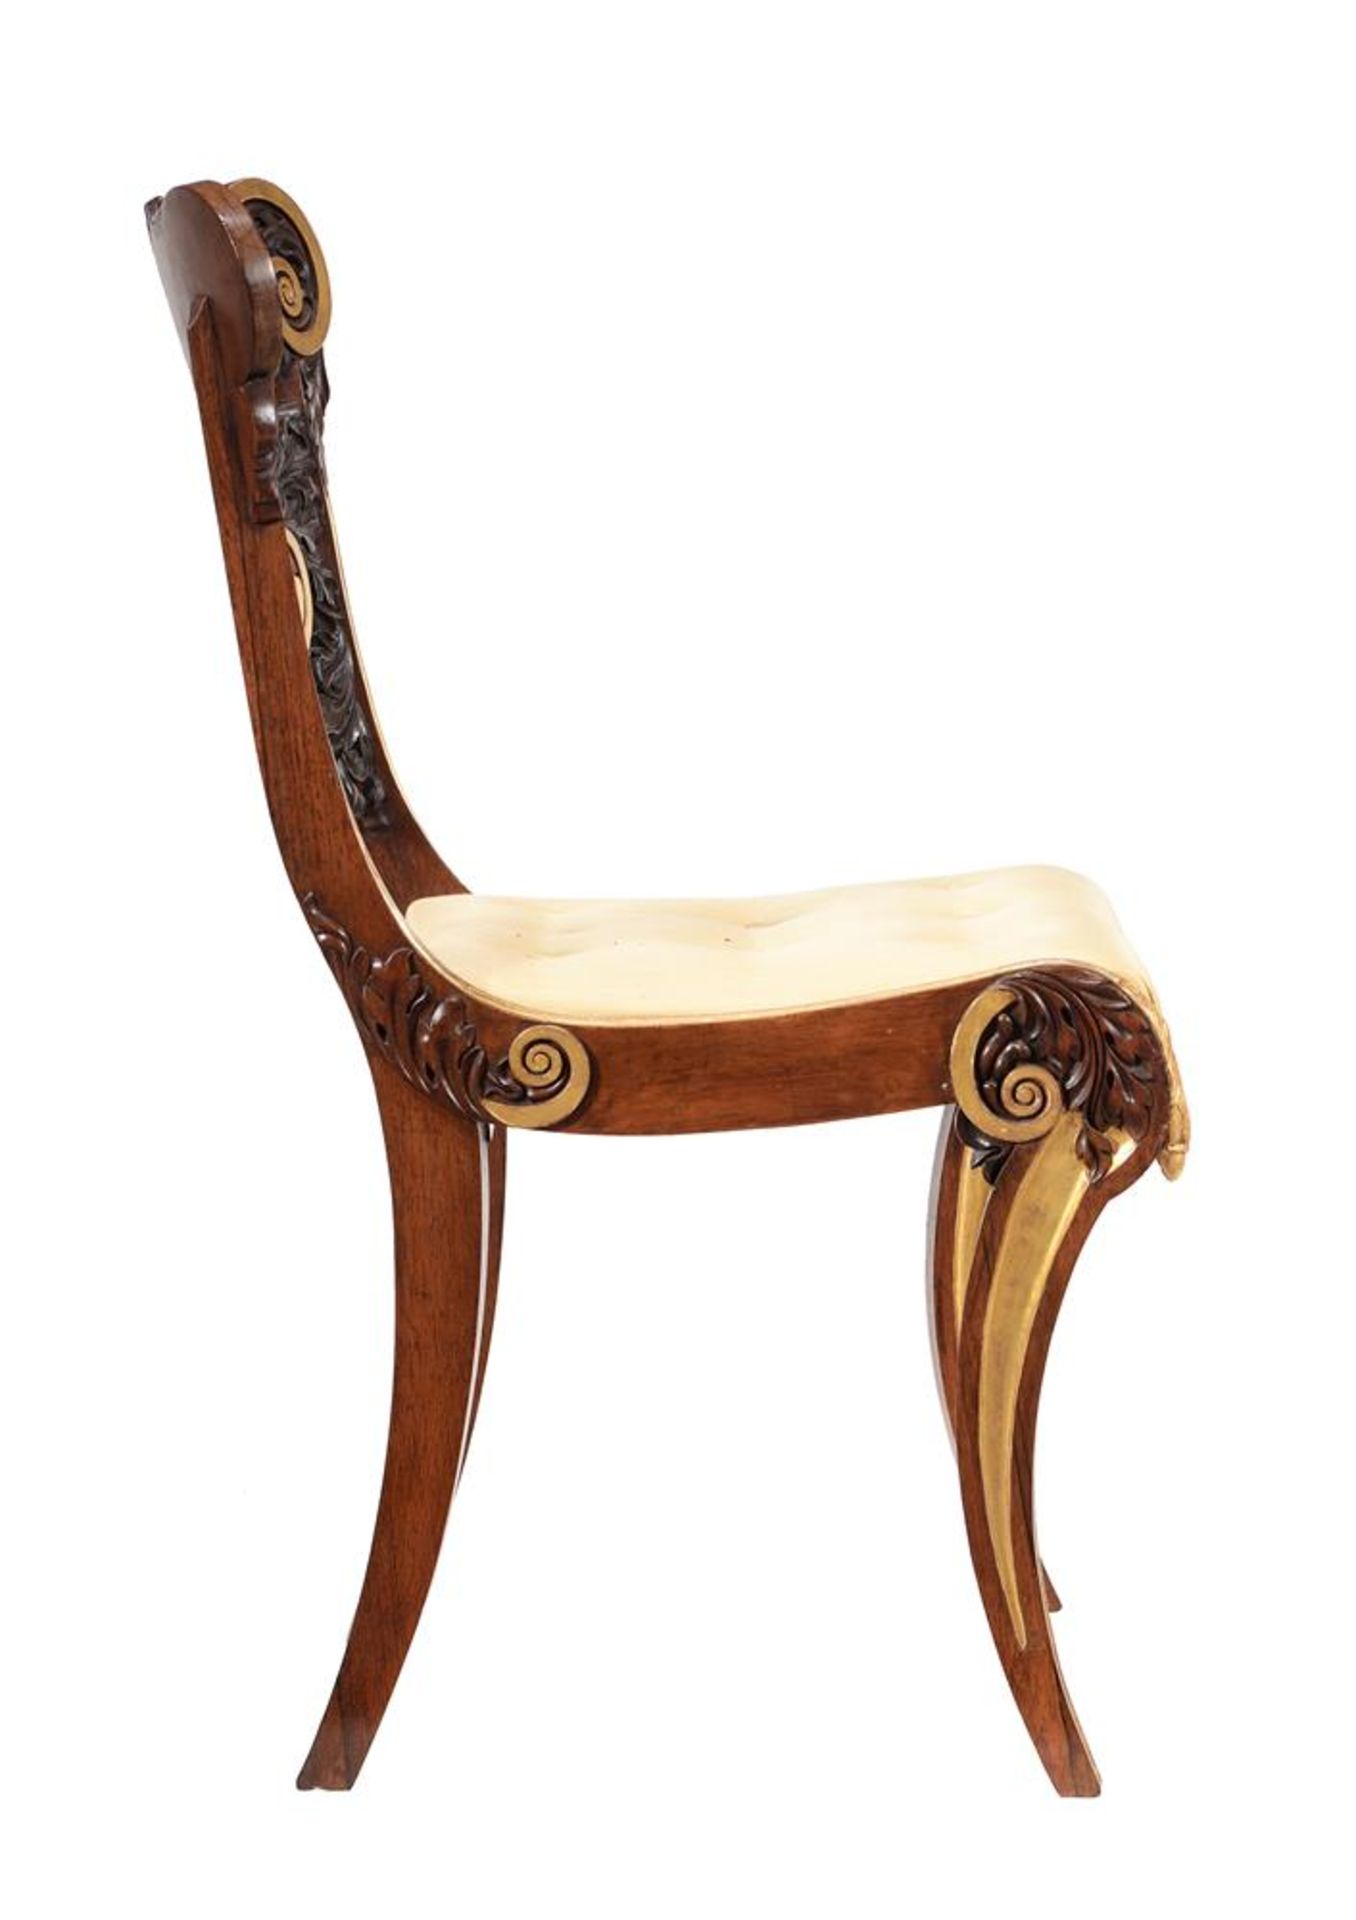 Y A PAIR OF WILLIAM IV CARVED ROSEWOOD AND PARCEL GILT SIDE CHAIRS, CIRCA 1835 - Image 7 of 7